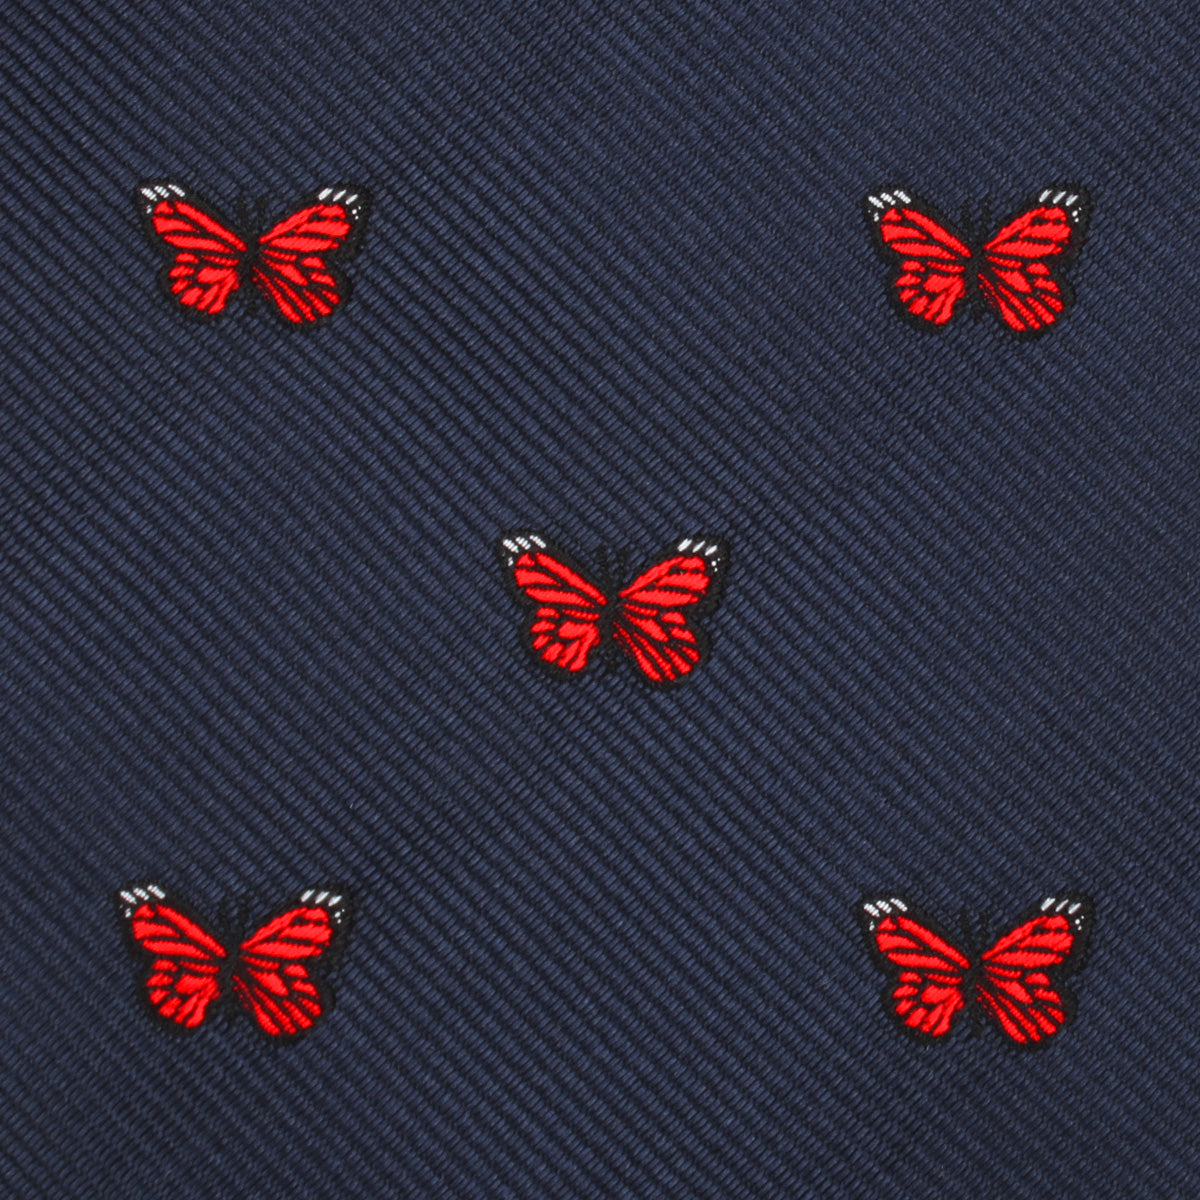 Butterfly Pocket Square Fabric